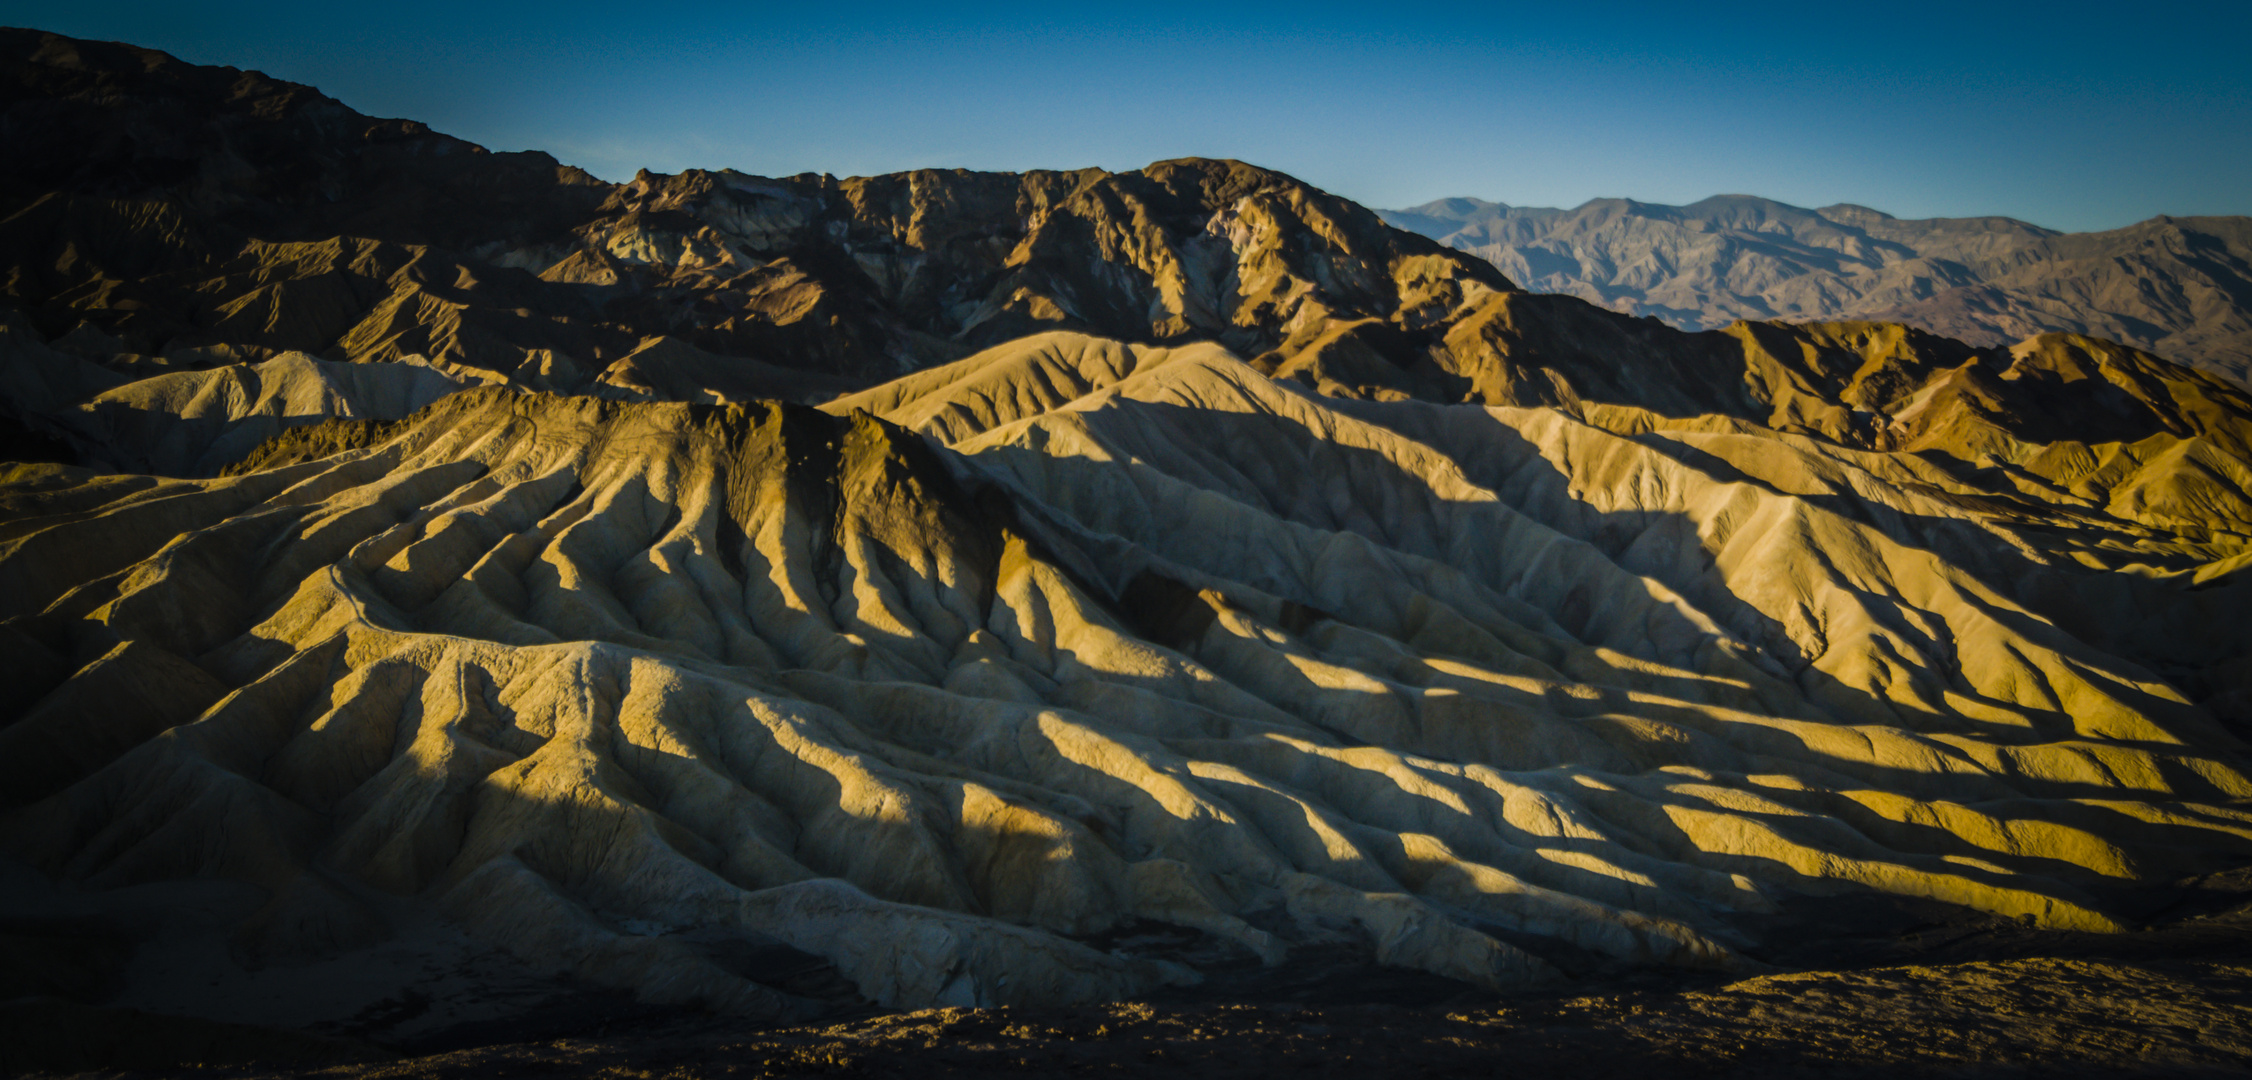 Morning in Death Valley